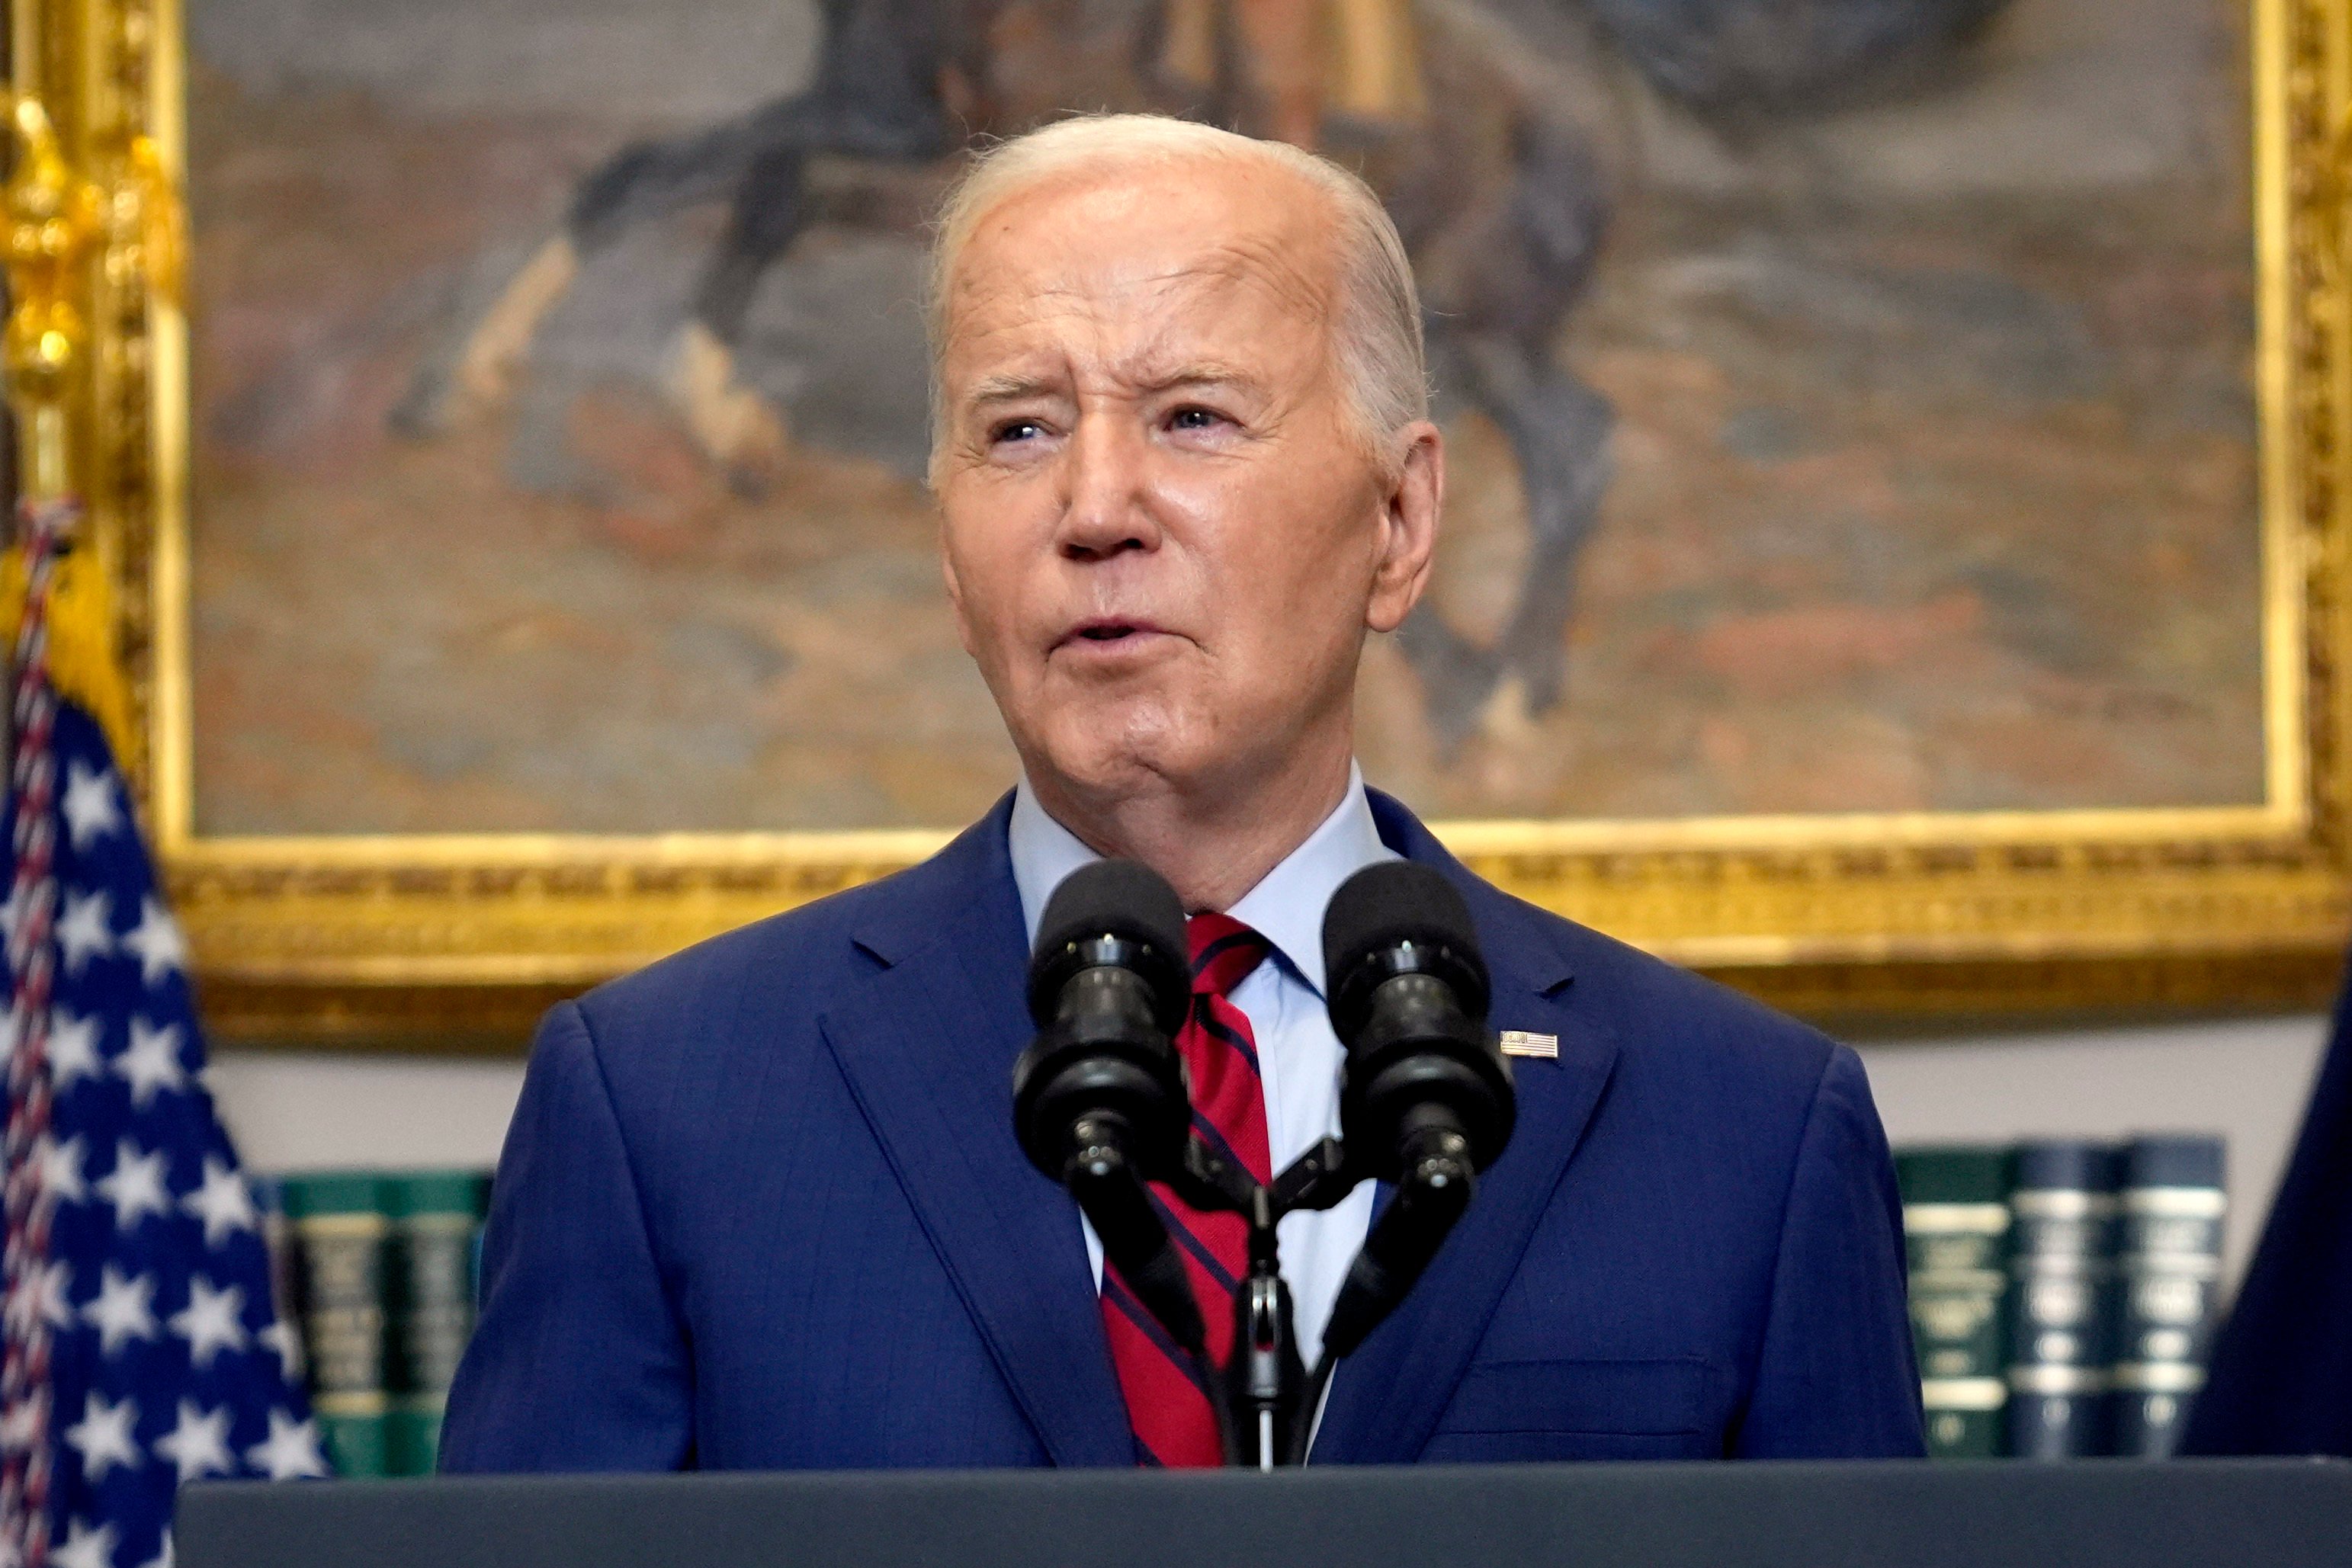 President Joe Biden has called Japan and India “xenophobic” countries that do not welcome immigrants. Photo: AP